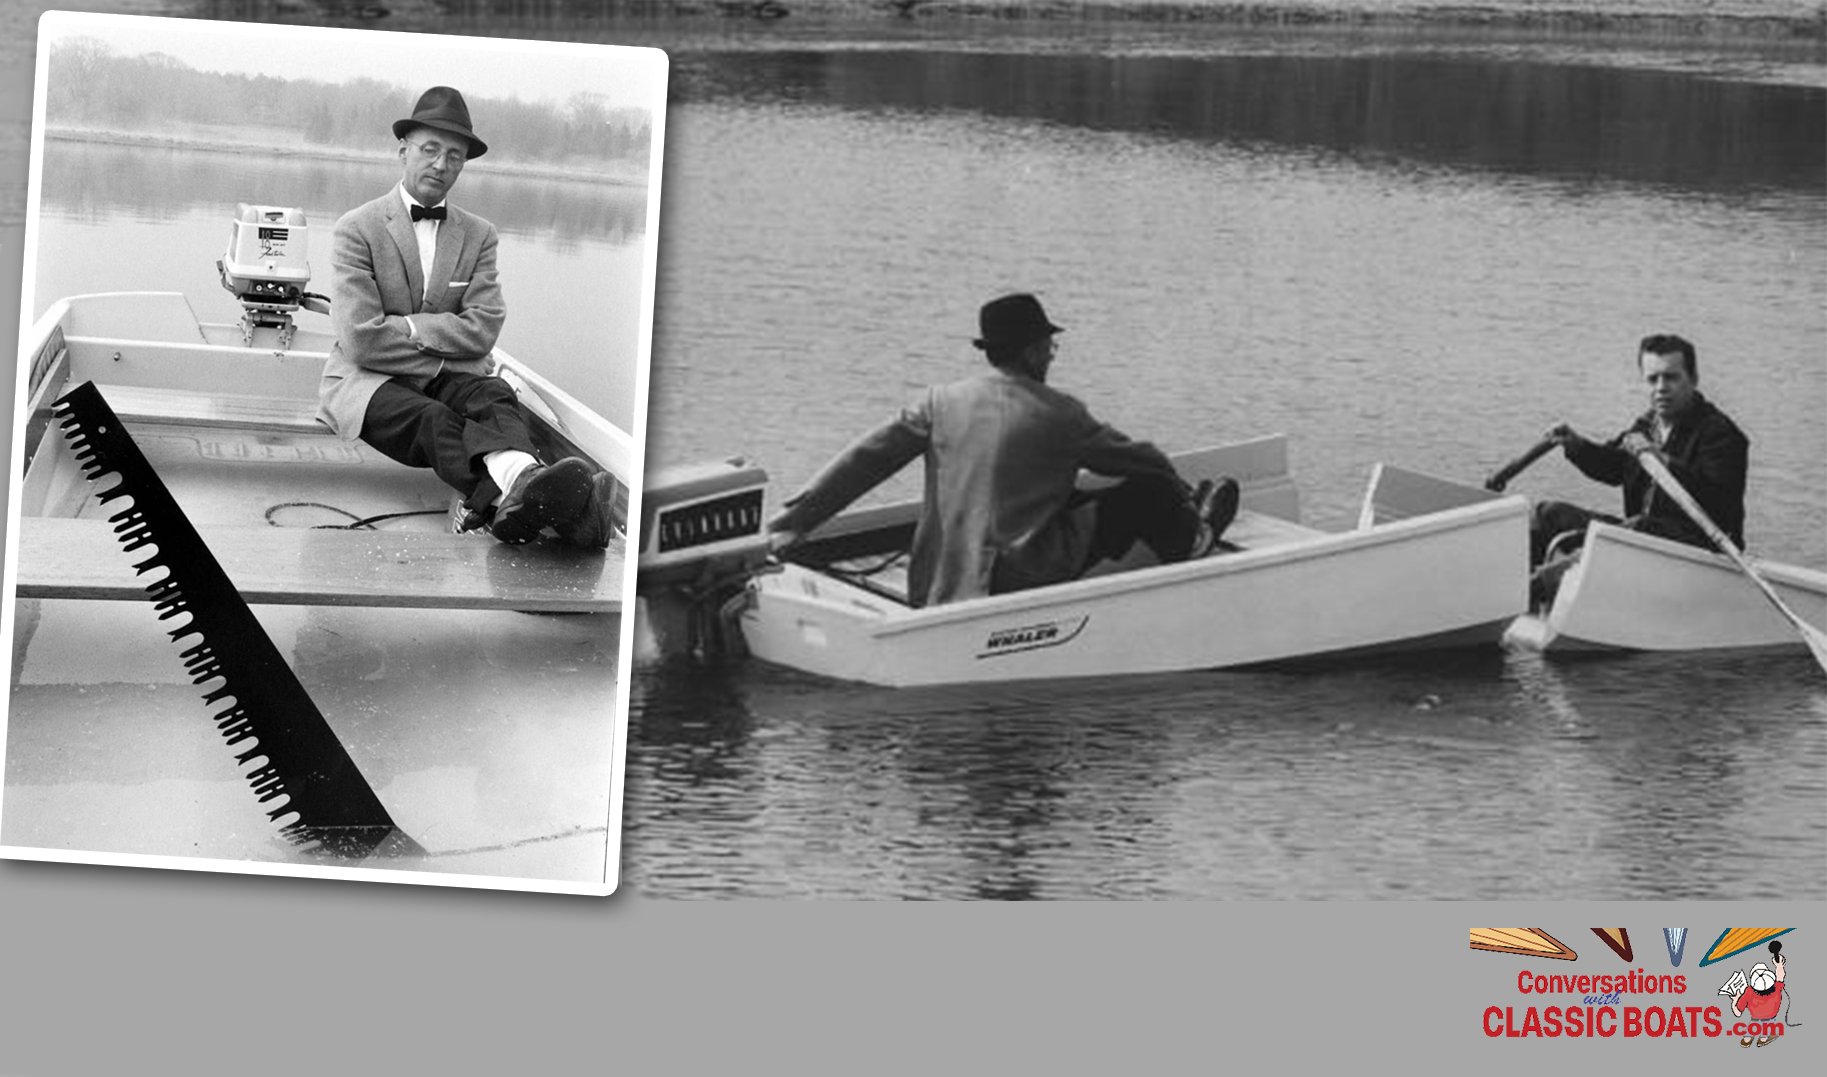  The story of Americas' "Unsinkable" runabout, the Boston Whaler.